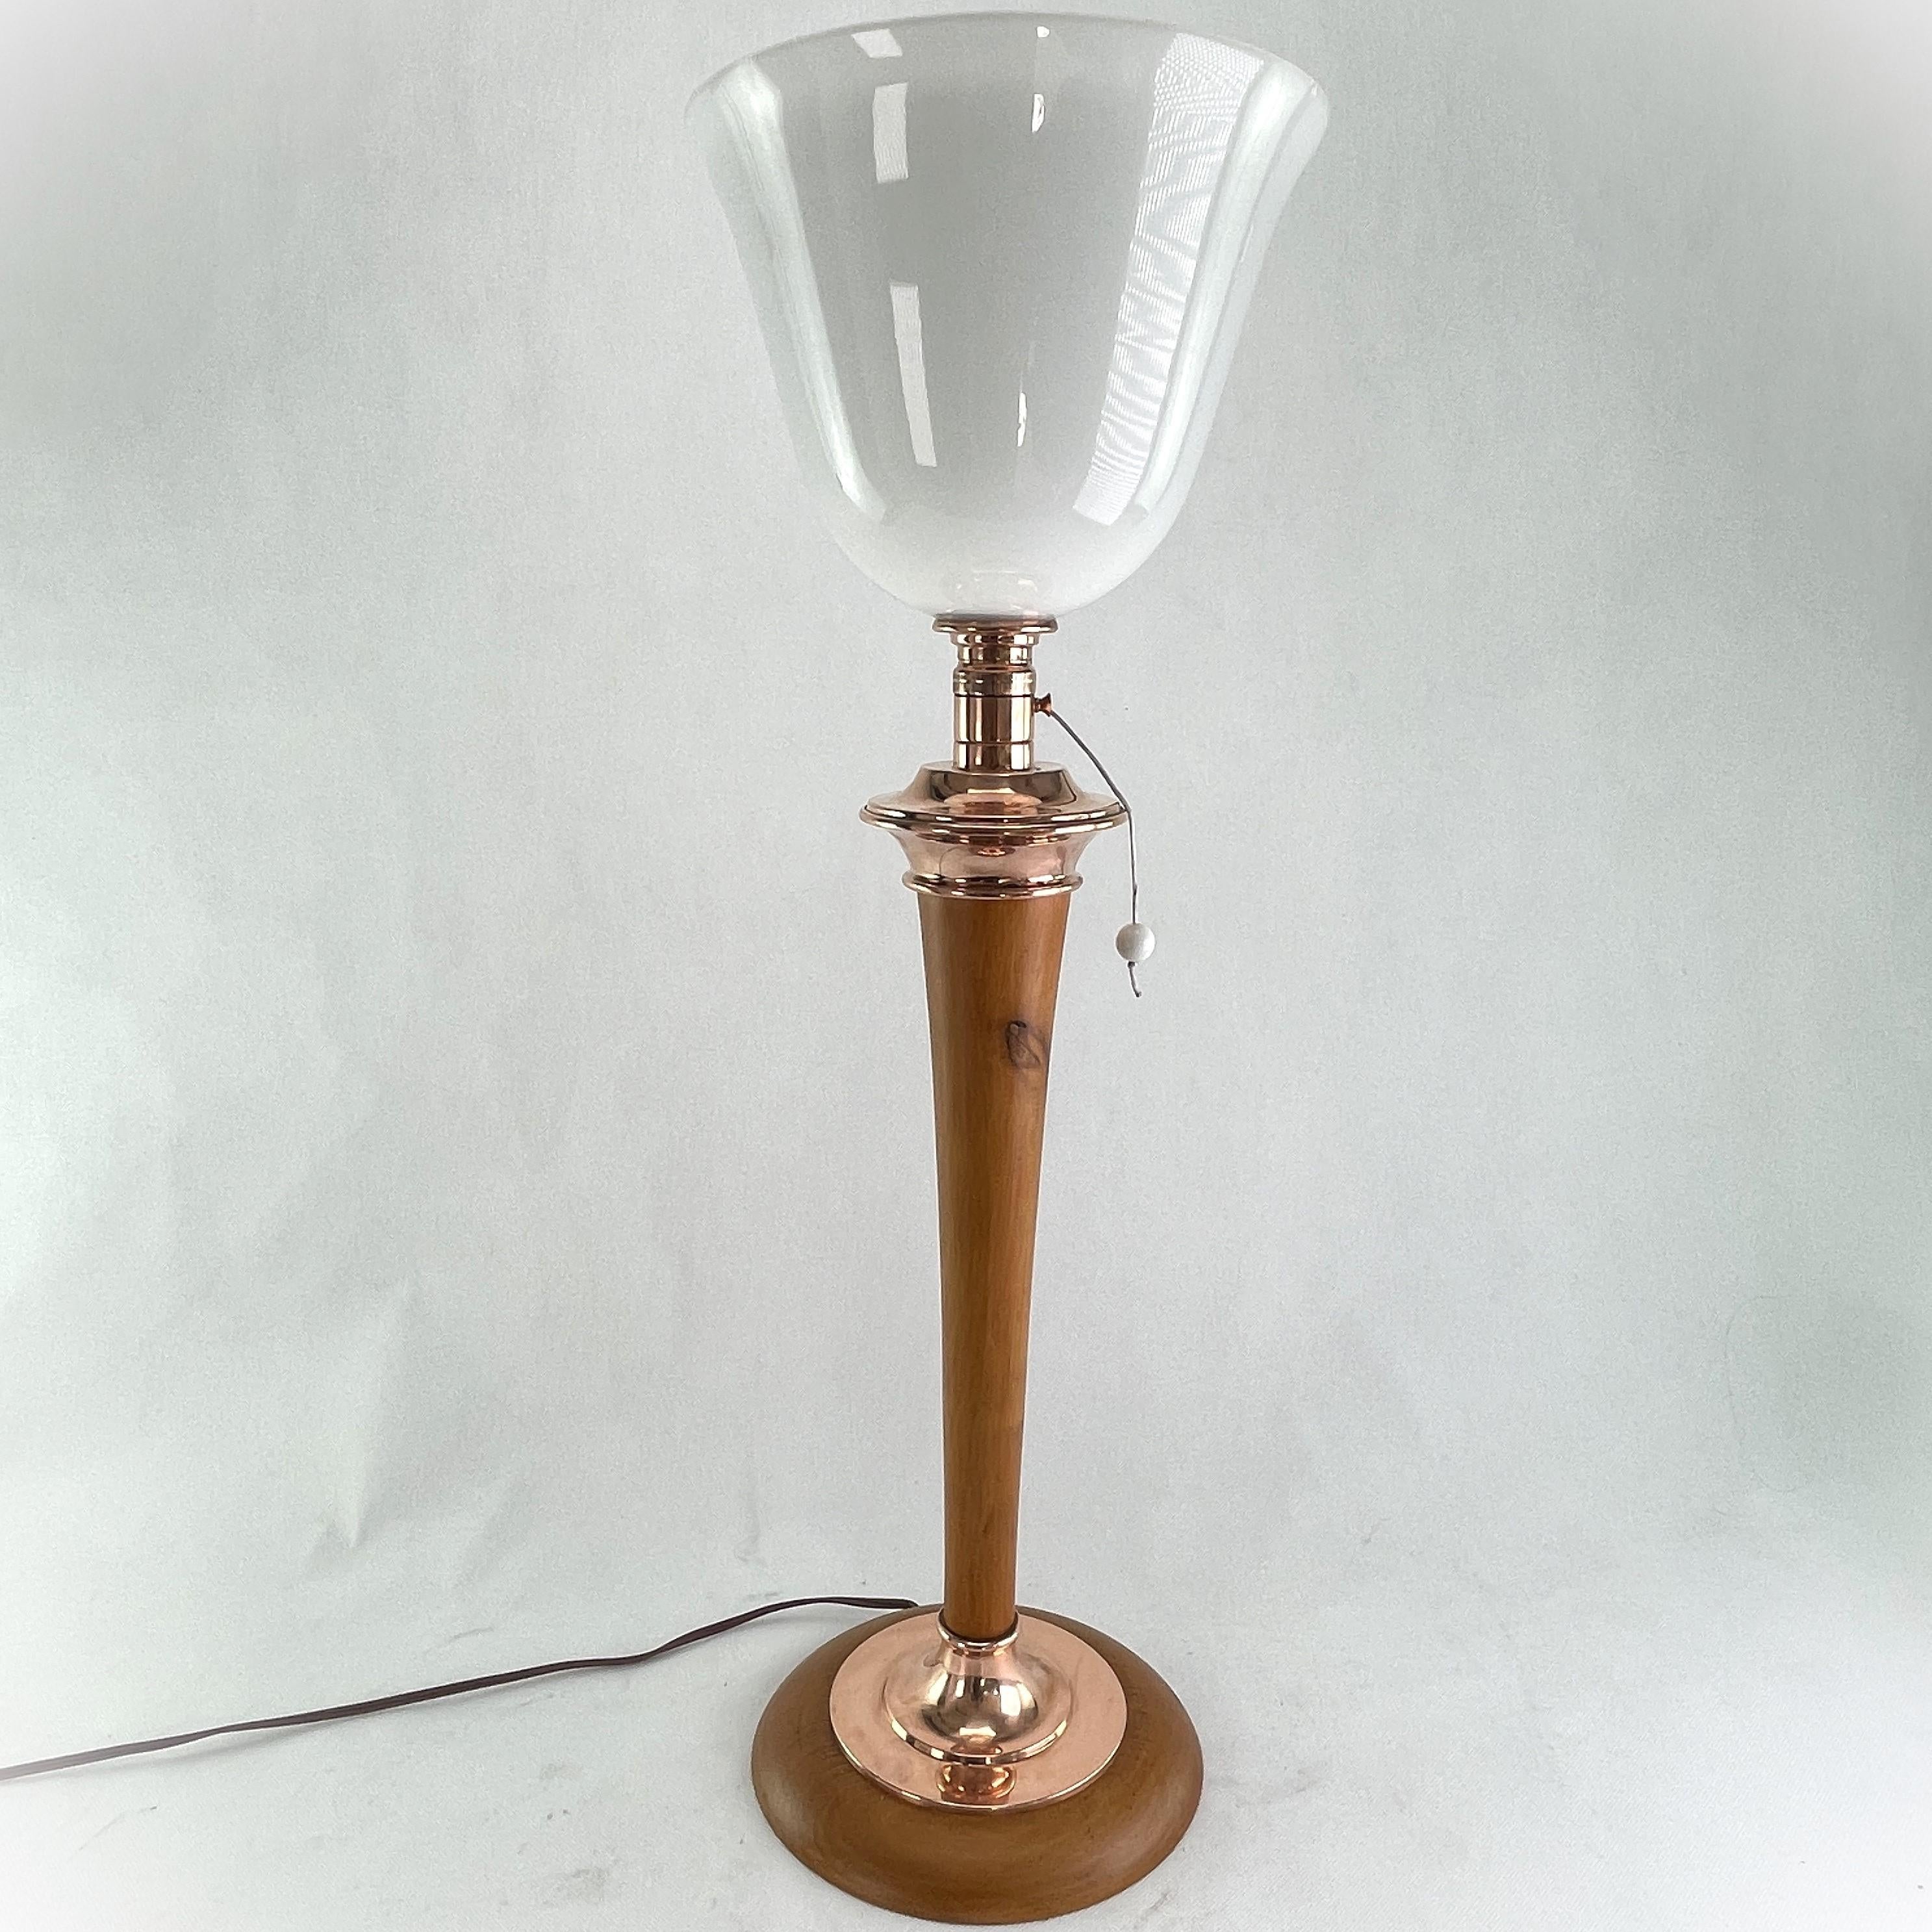 art deco MAZDA table lamp

This rare, original table lamp by the well known company MAZDA captivates with its simple and matter-of-fact Art Deco design. The base is made of wood and copper. A pull switch is located in the holder below the opal glass